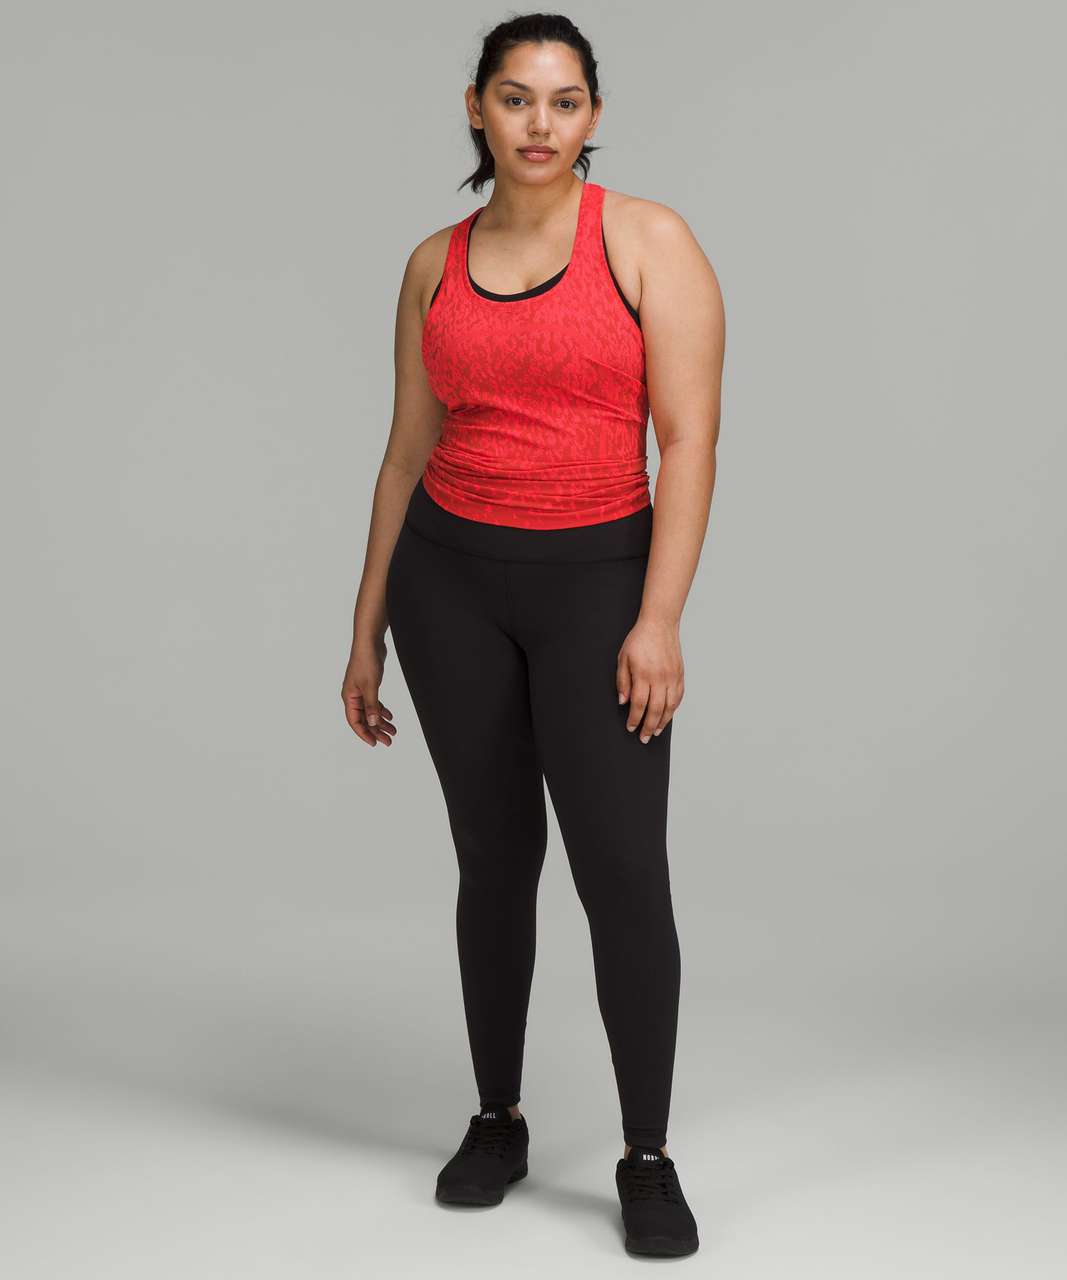 Lululemon Swiftly Tech Racerback Tank Top 2.0 - Covered Camo Red Rock / Flare